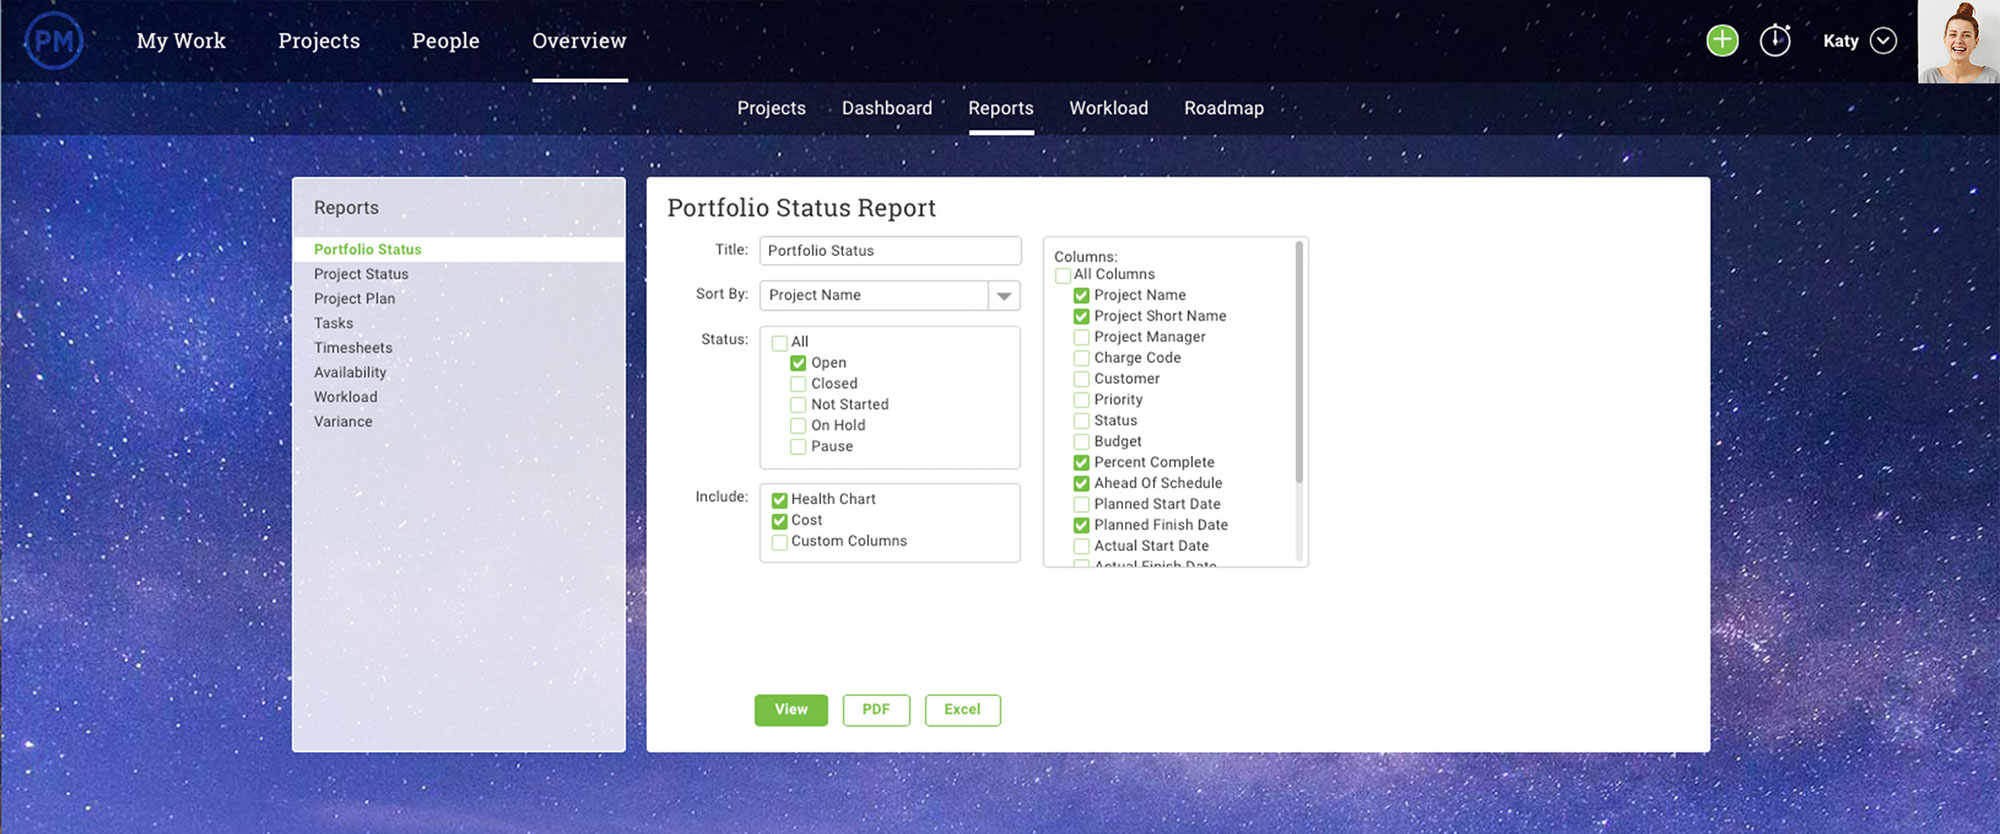 portfolio reporting for programs and projects